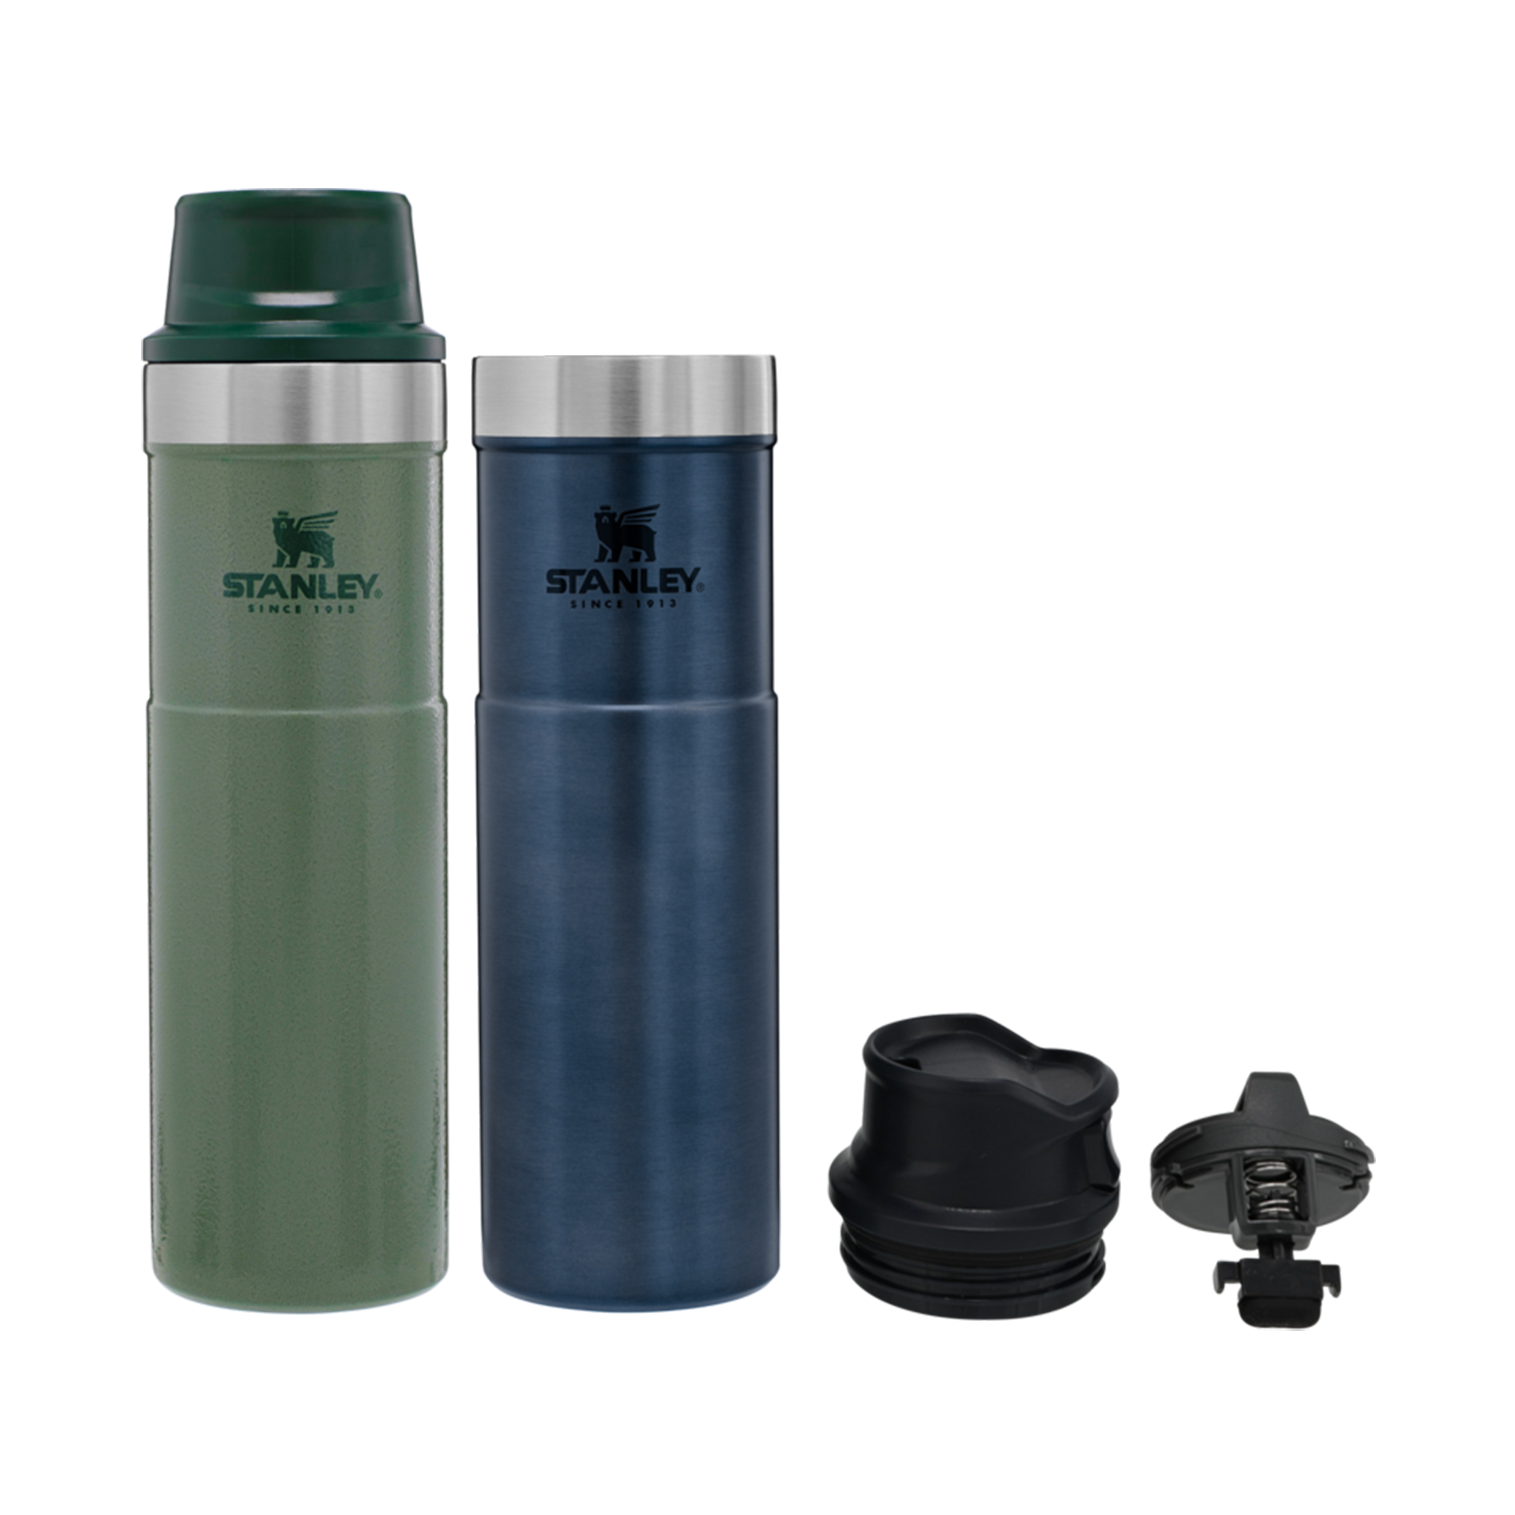 Classic Trigger-Action Travel Mug Twin Pack | 20 OZ